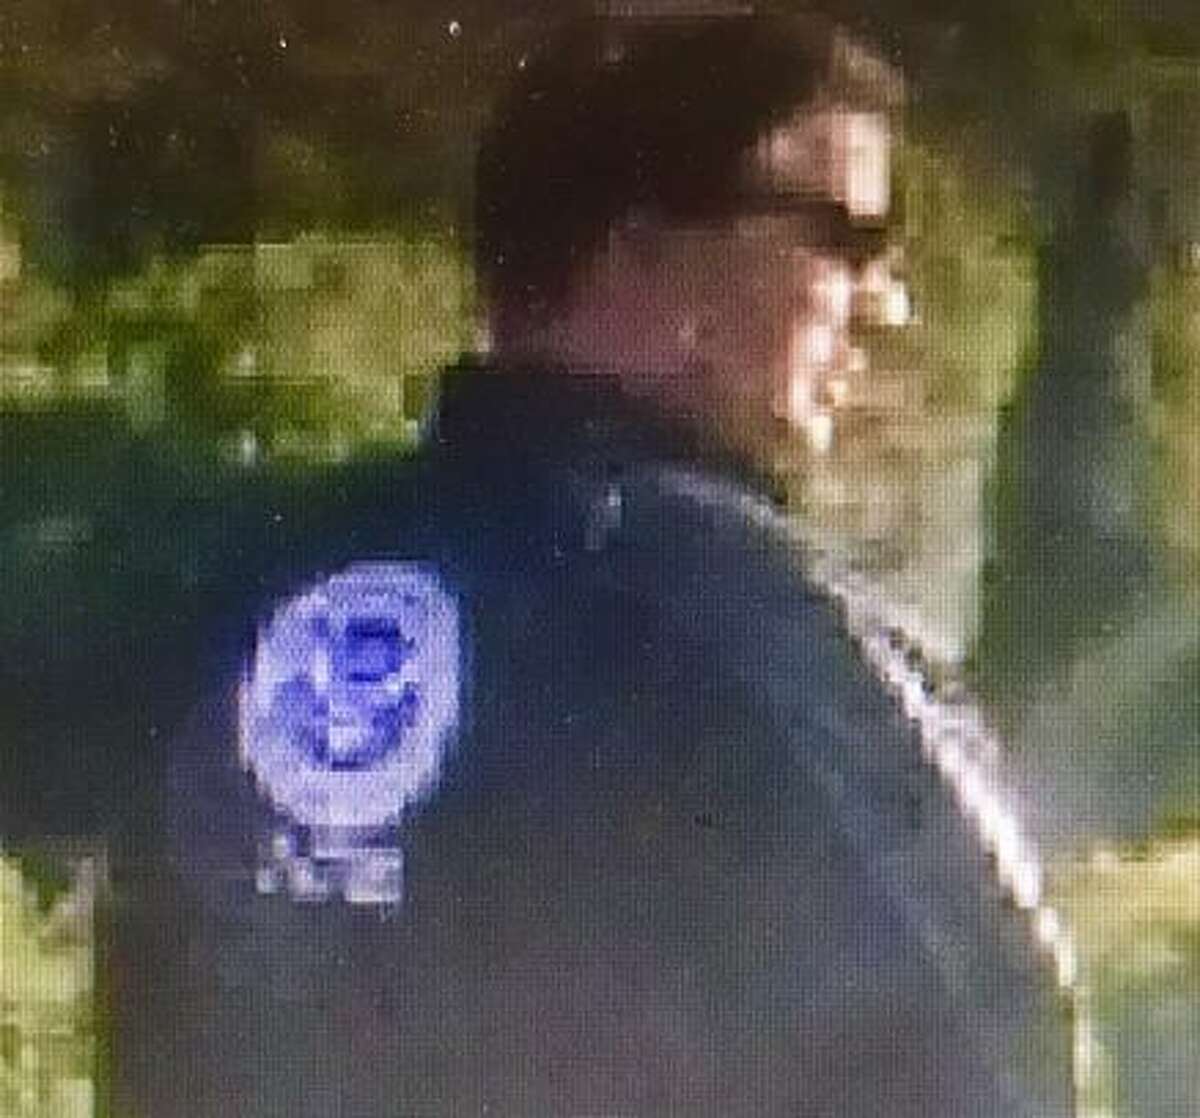 A man said to be Peter Acton is seen wearing an ICE jacket outside a San Rafael church.